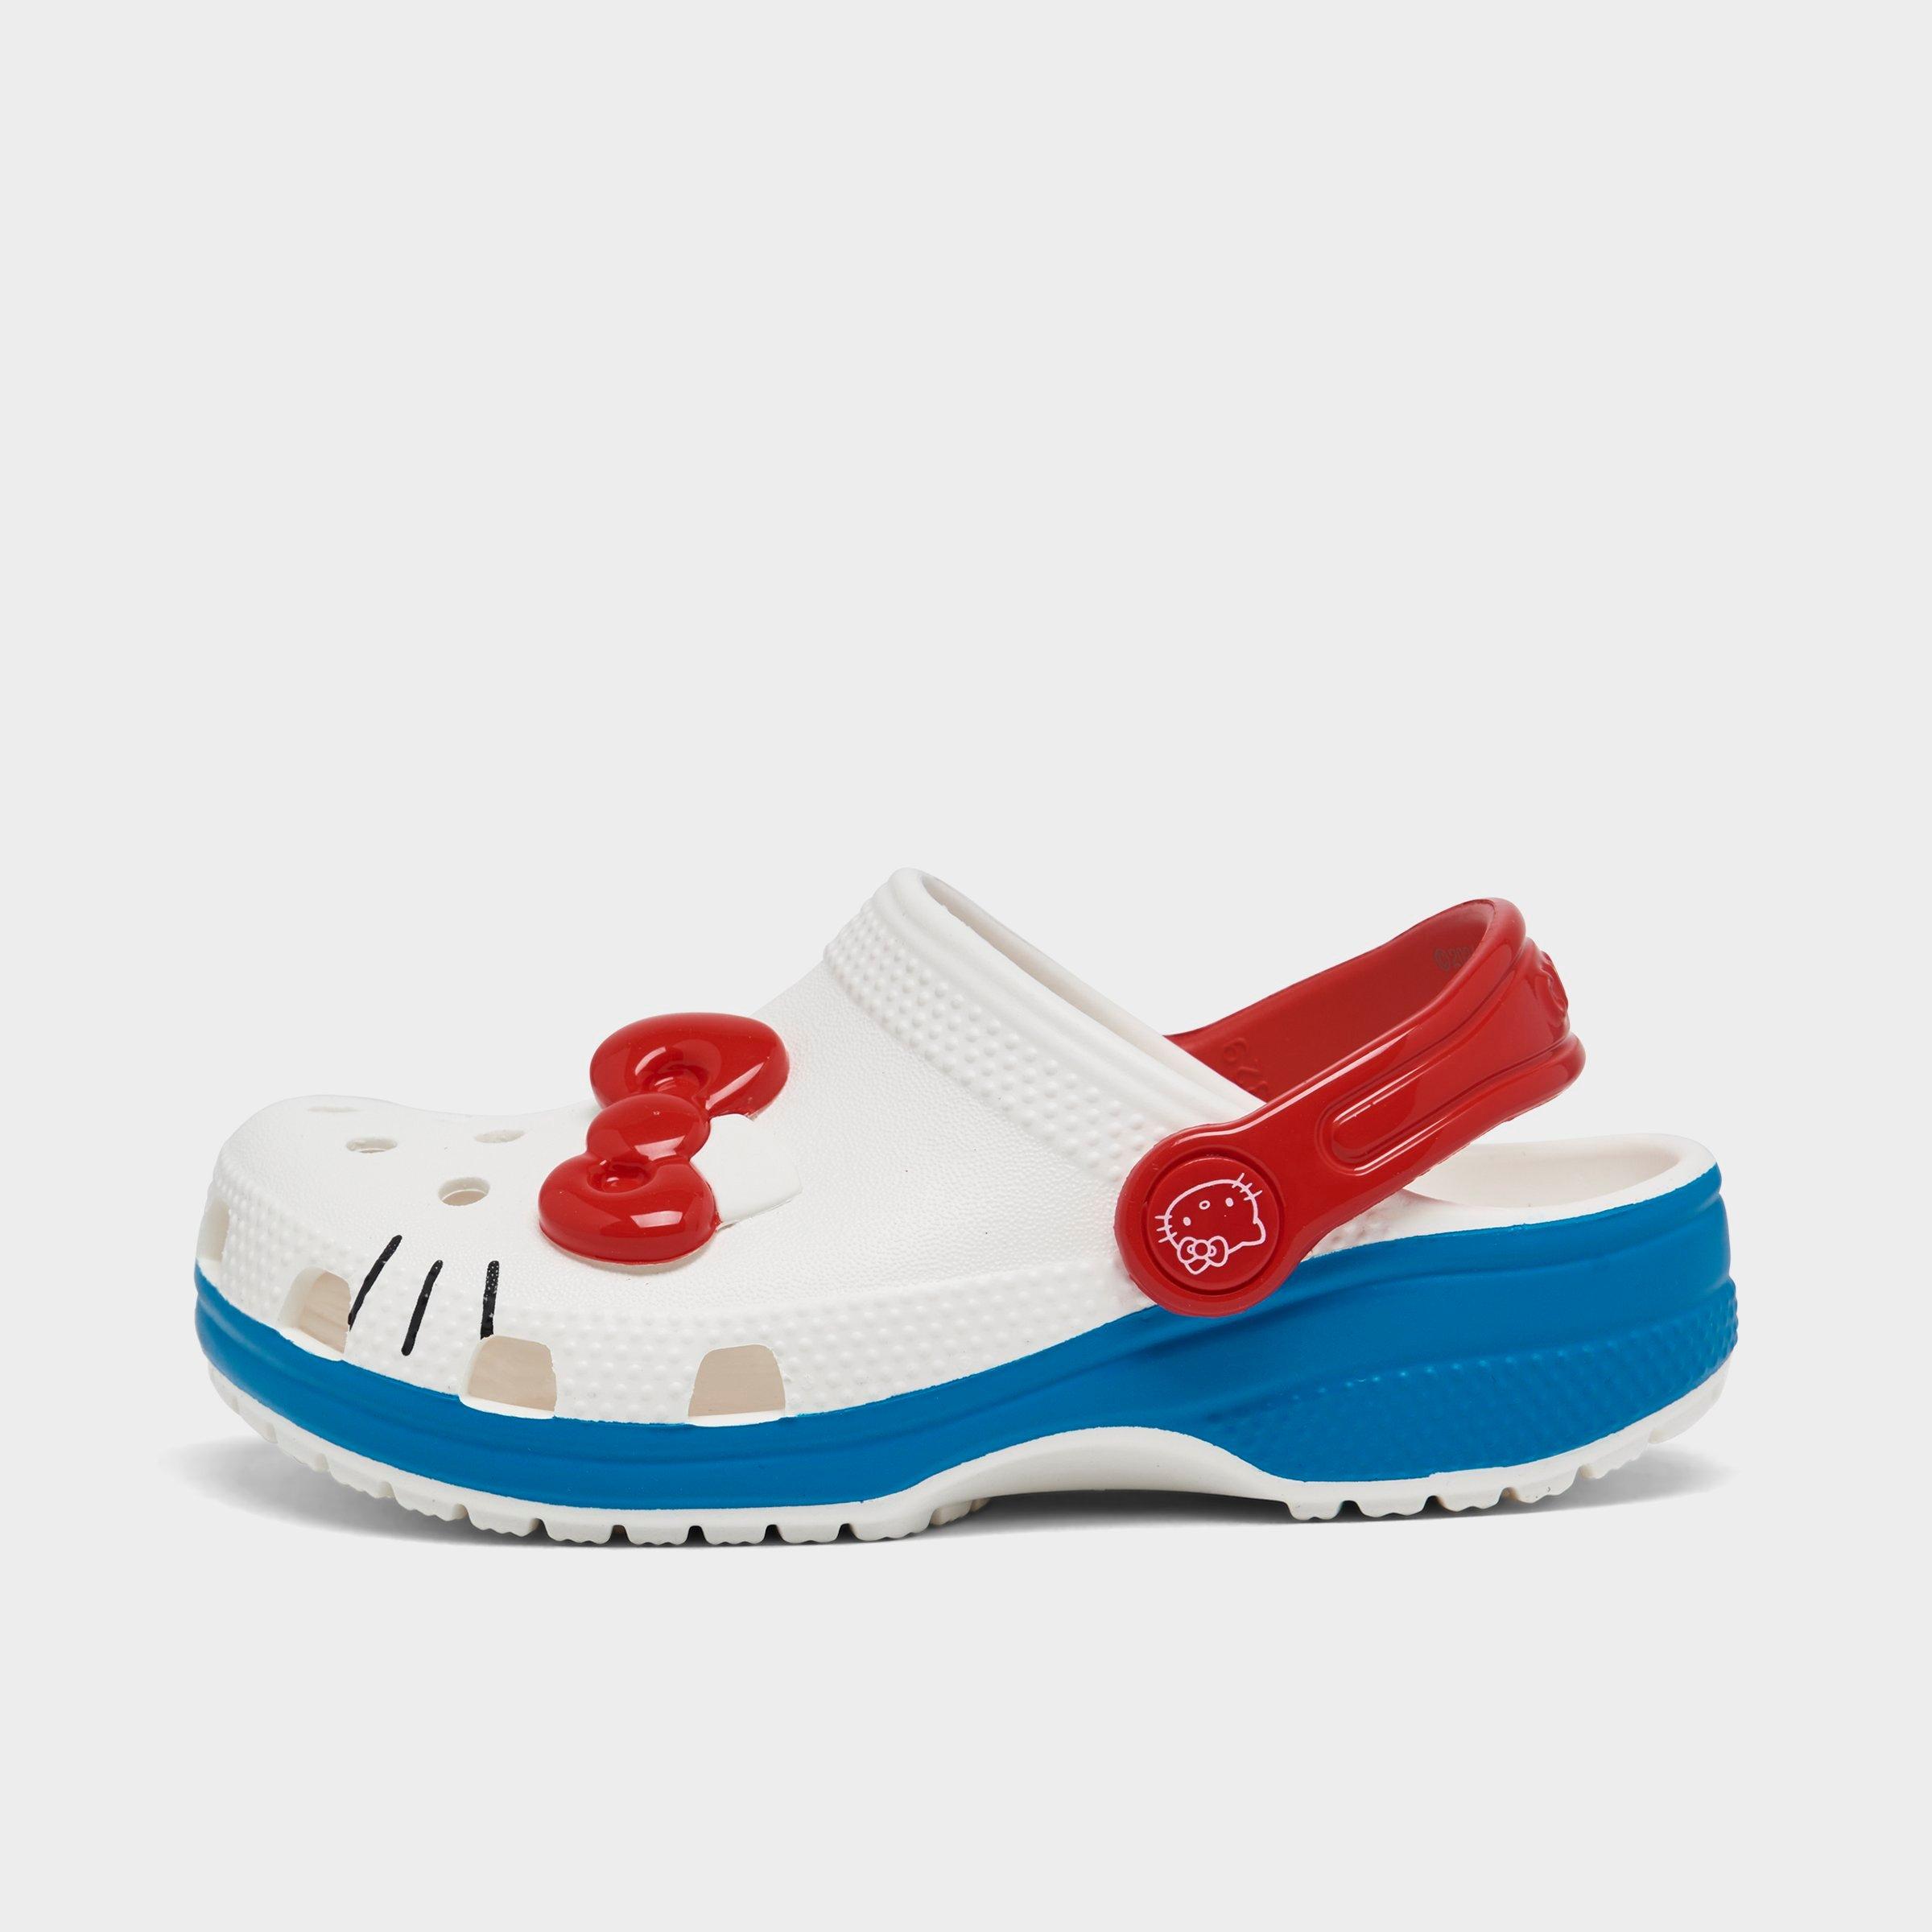 UPC 196265573813 product image for Crocs Girls' Toddler x Hello Kitty Classic Clog Shoes in White/White Size 8.0 | upcitemdb.com